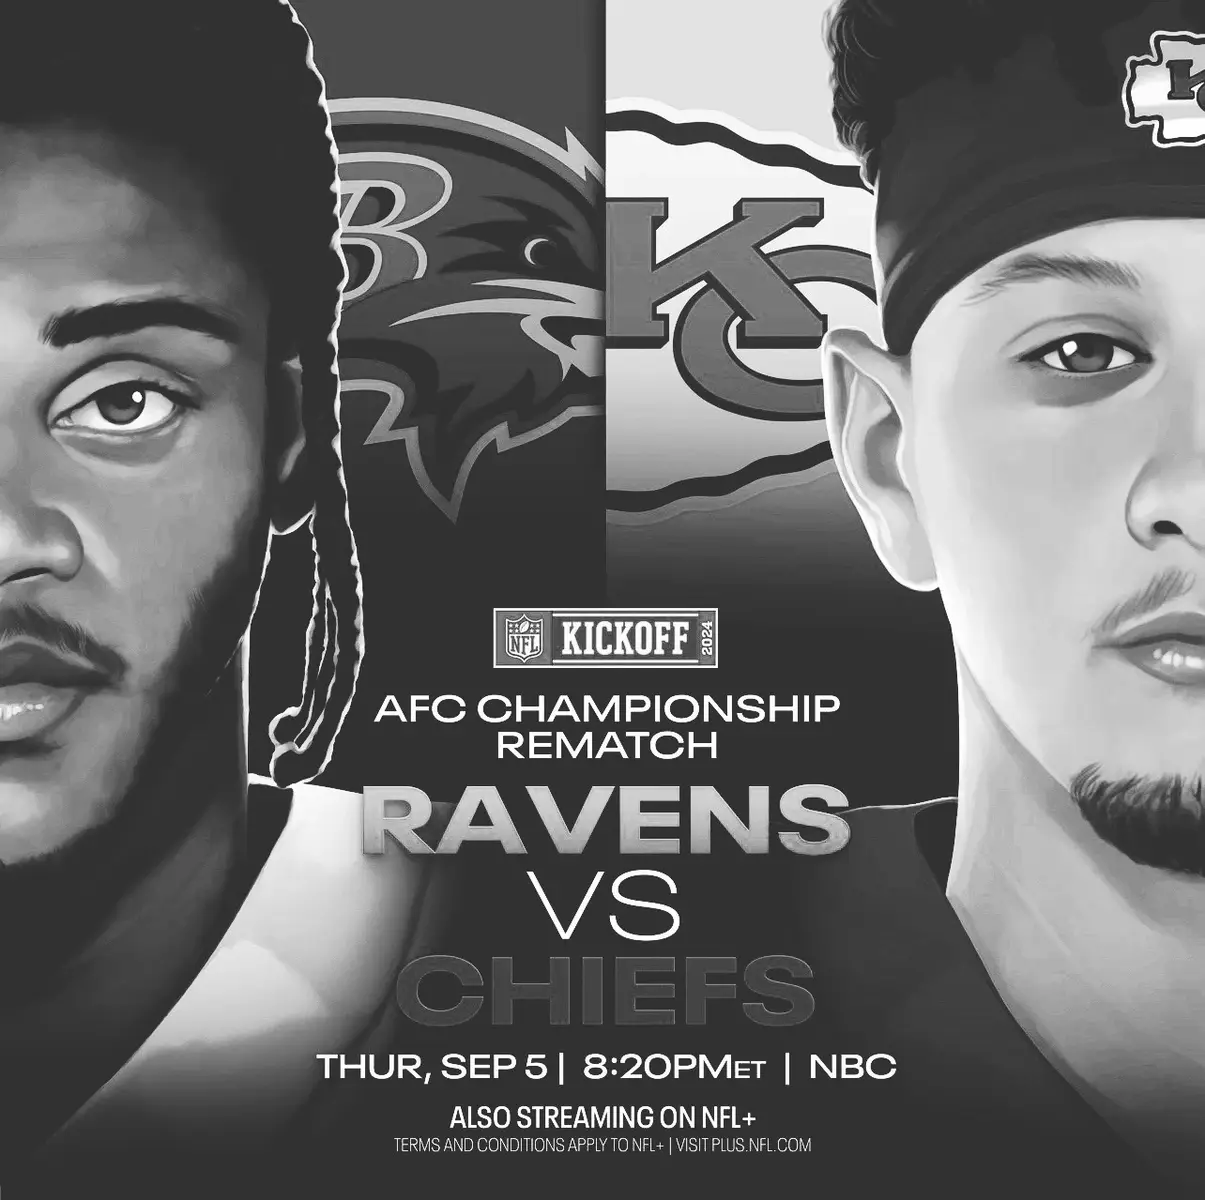 Yes we are doing this again #nfl #ravens #cheifs #ravensvschiefs 